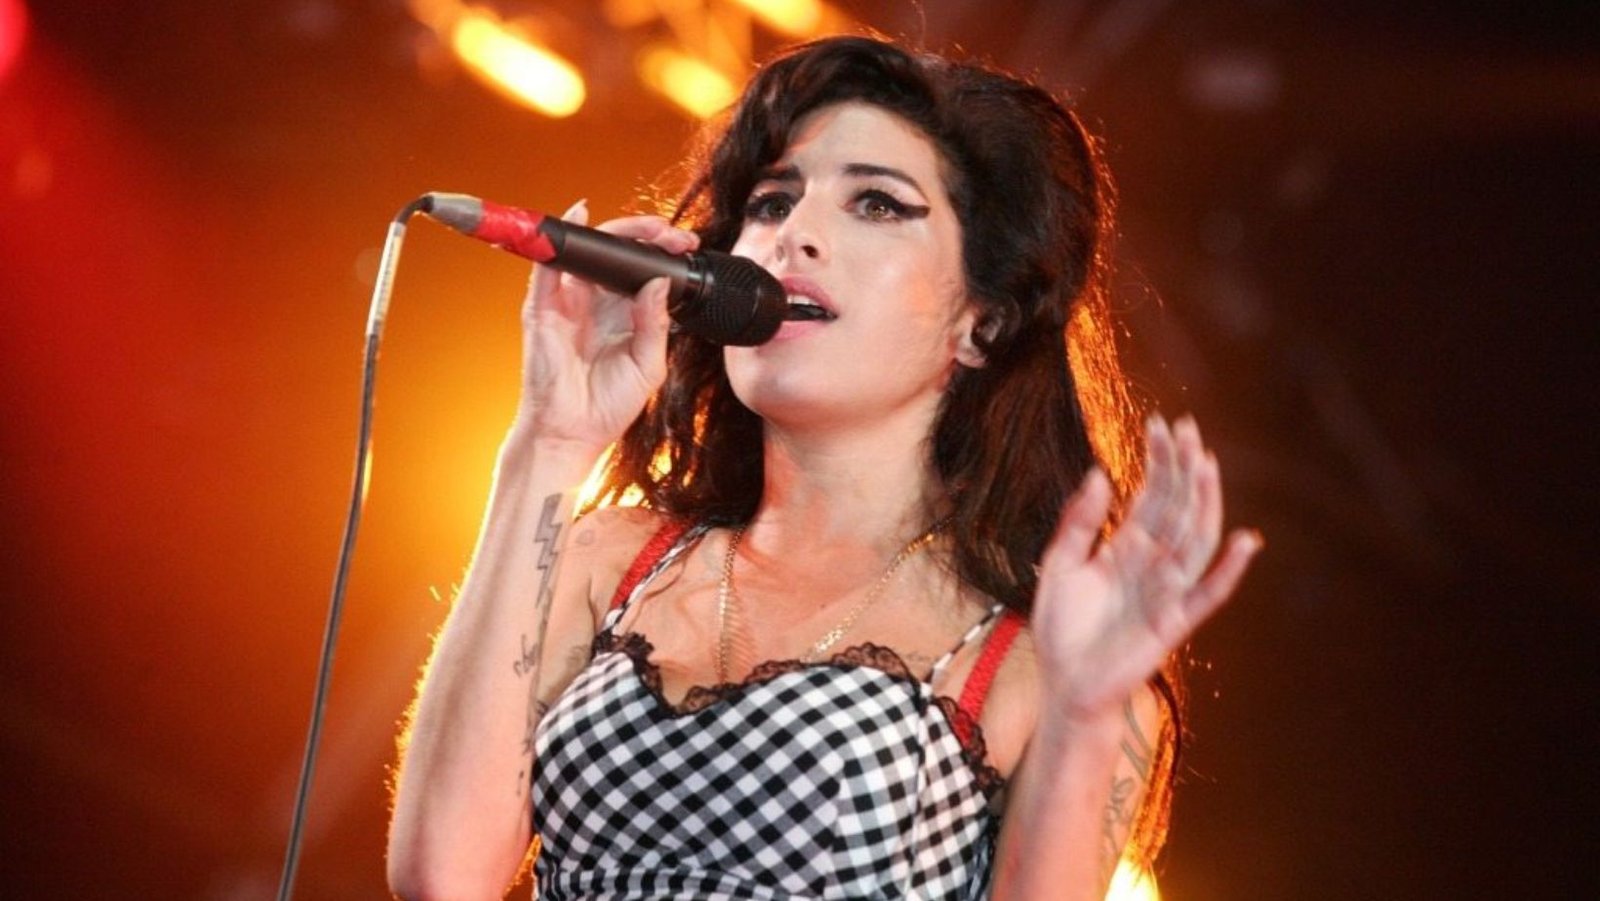 Amy Winehouse biopic "Back to Black" to be directed by the creator of "Fifty Shades of Grey"